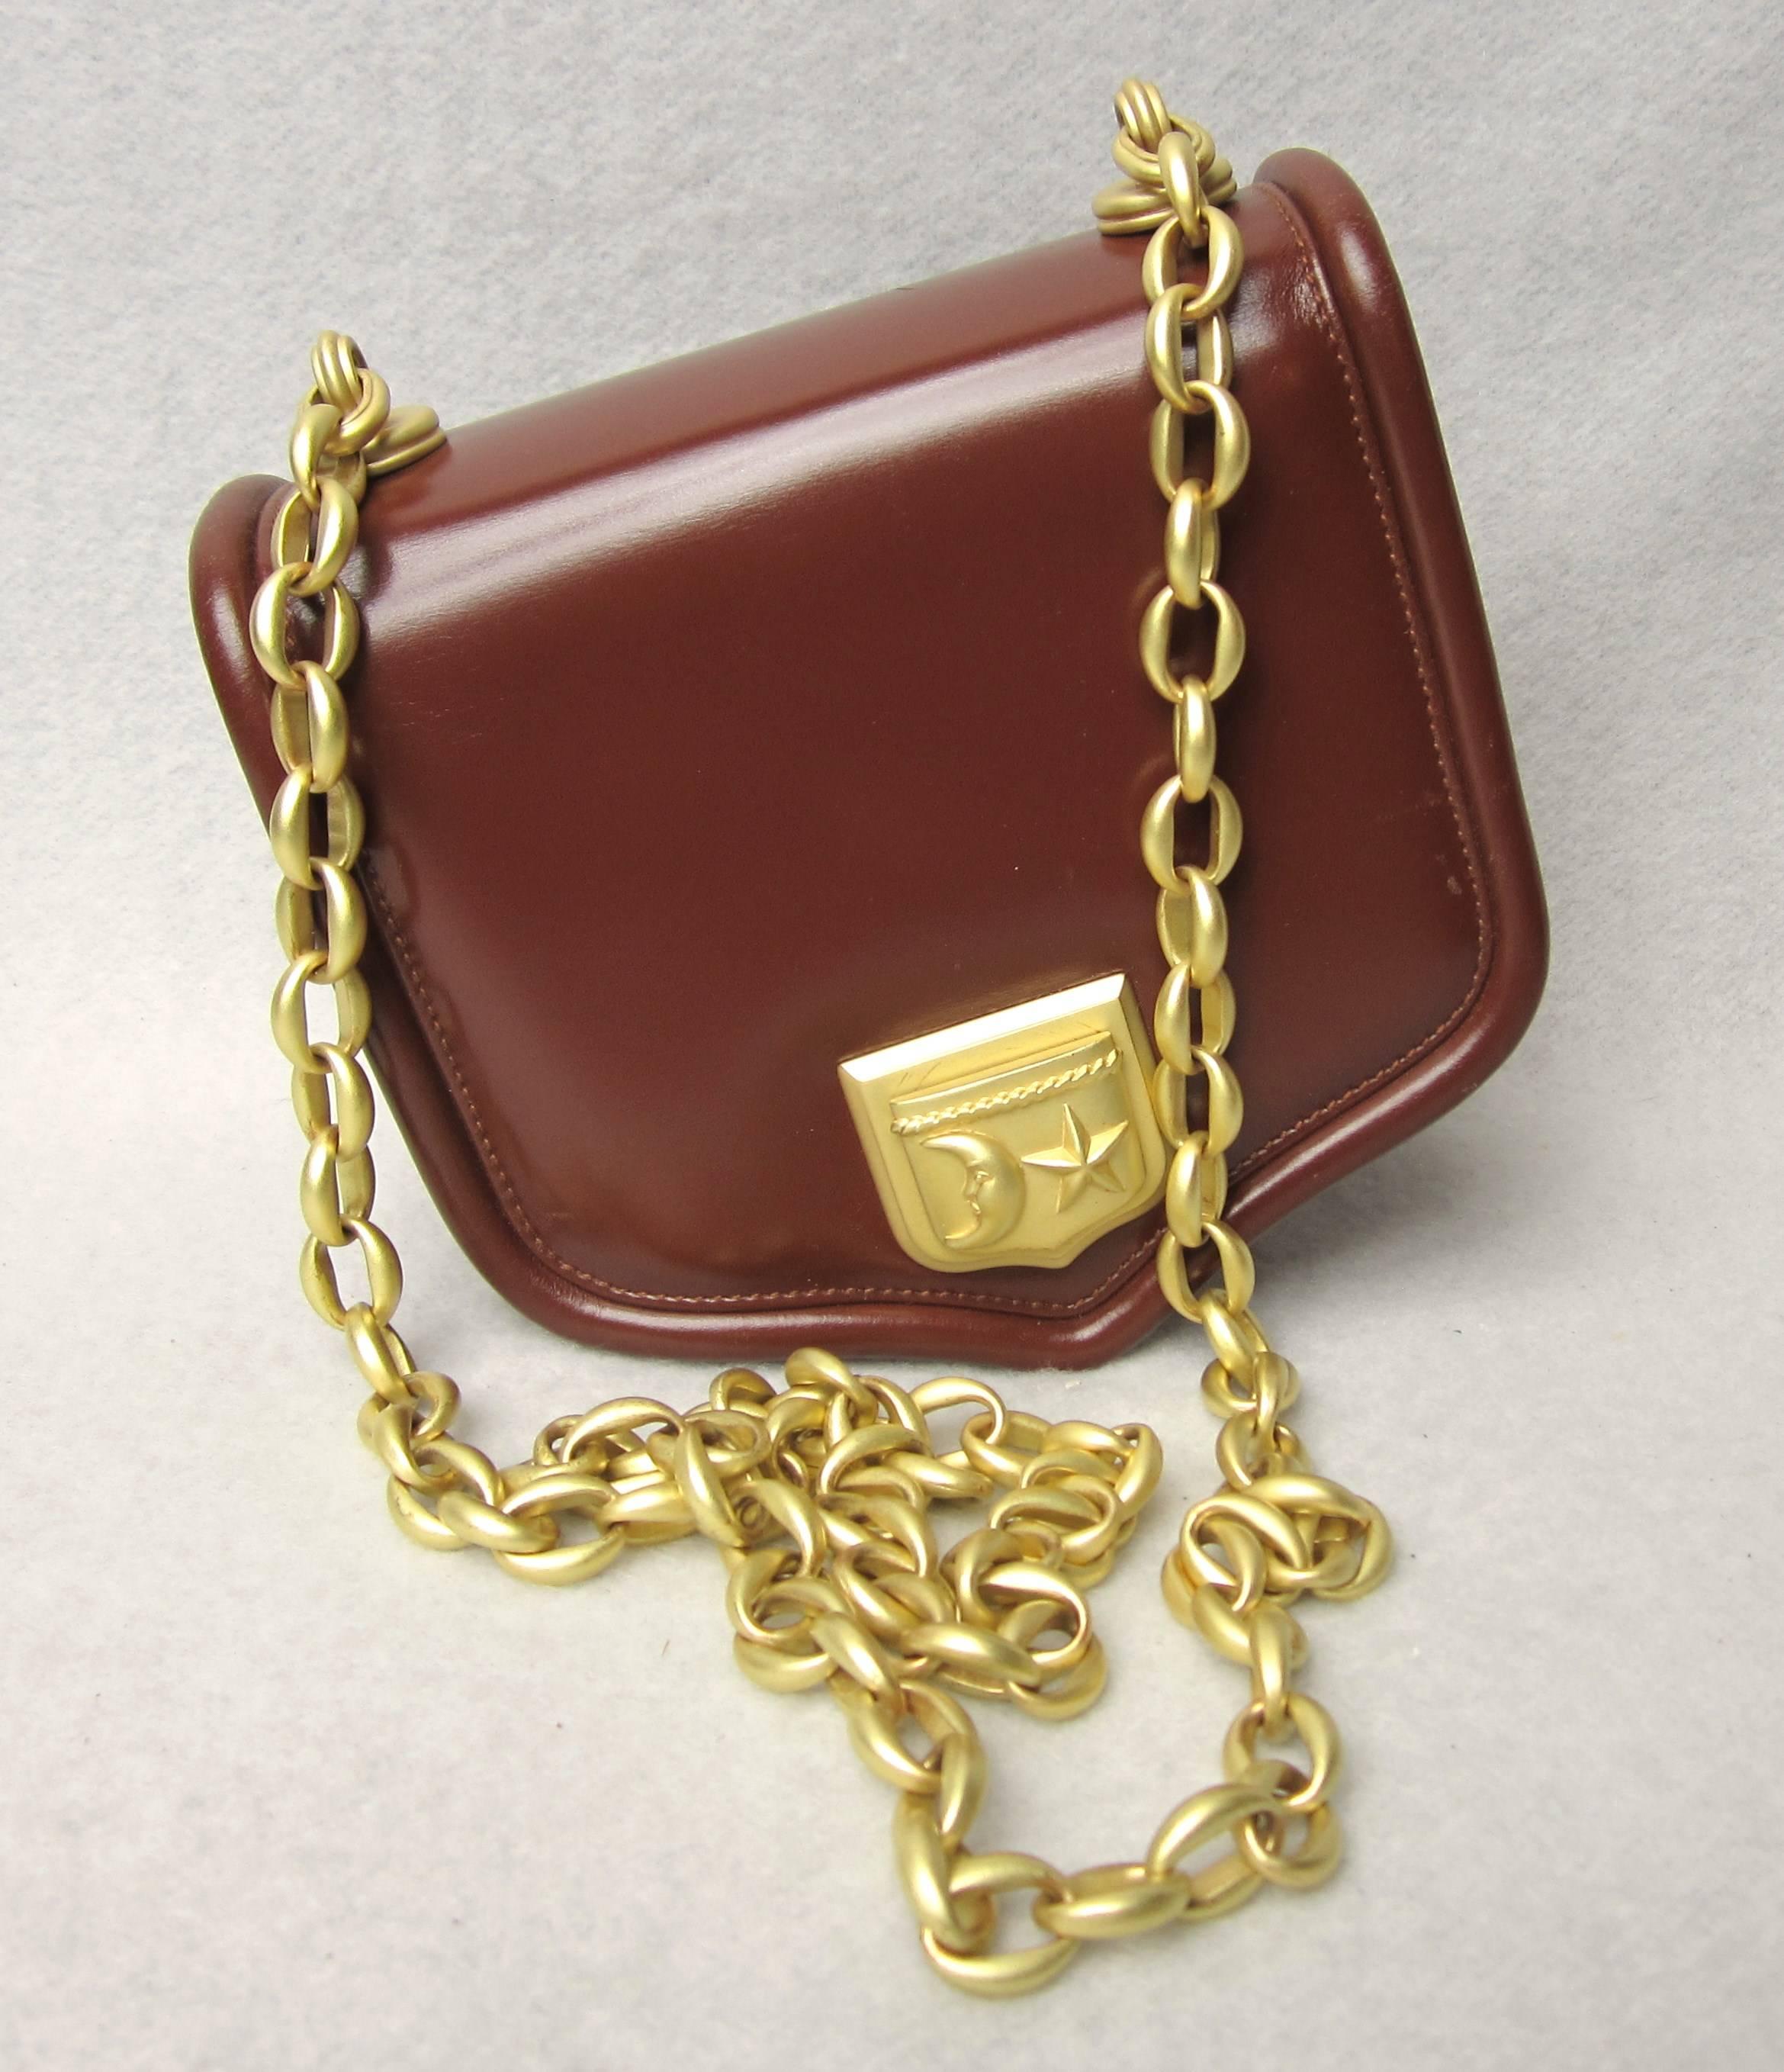 Long Gold Brushed Chain link on this Kieselstein Handbag. This was Purchased new back in the early 1990s and never worn. Zipper compartment Measuring 6.25 wide x 5.5 high x 3 deep with a 21 in. long chain. Dust bag included. This is out of a massive